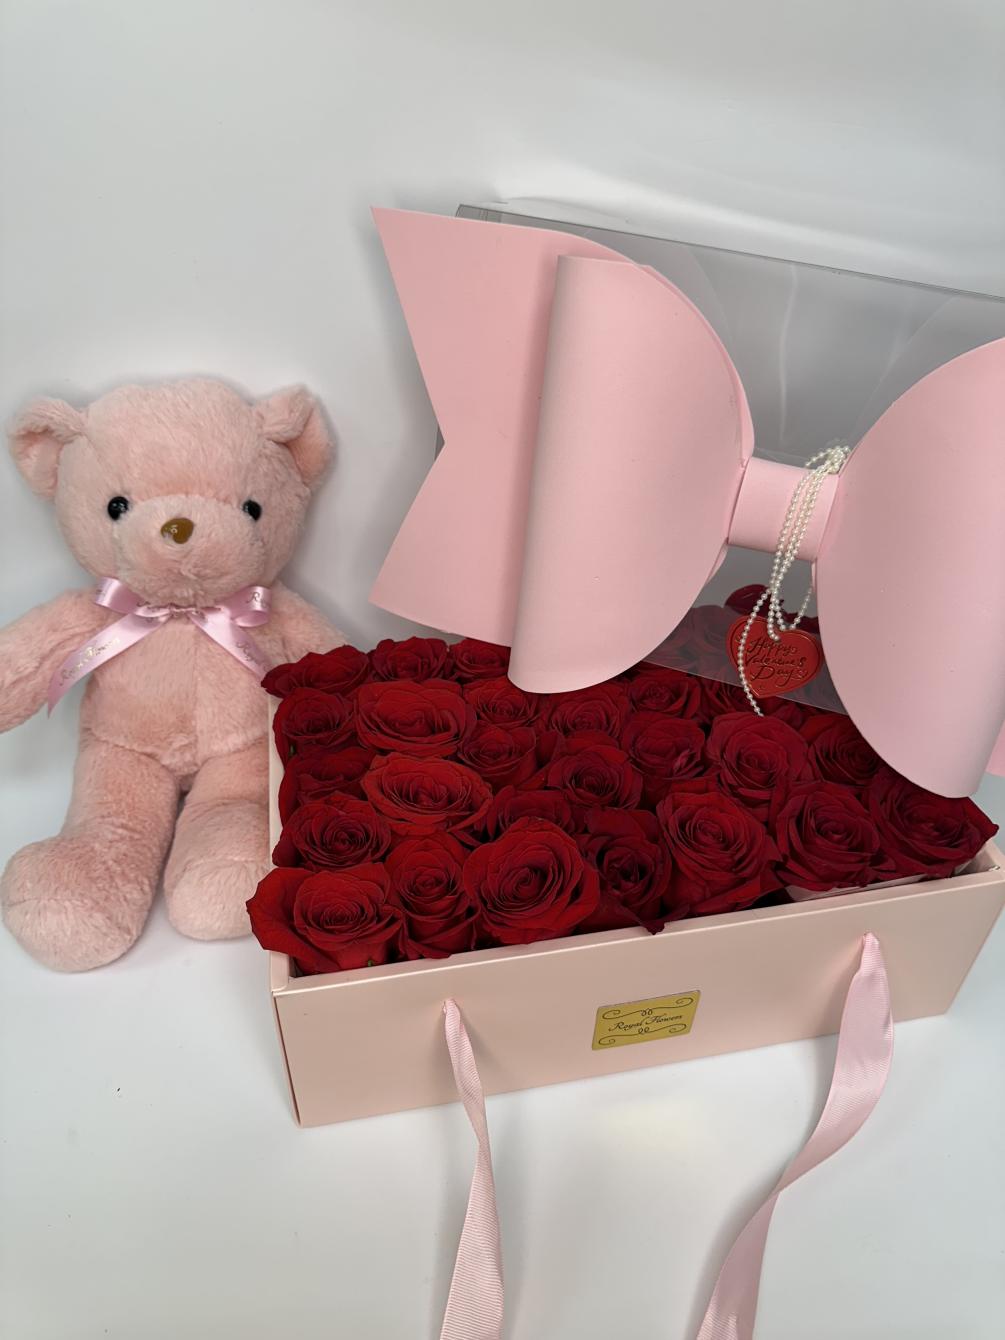 Stunning box filled with average of 3 dozen roses with a beautiful